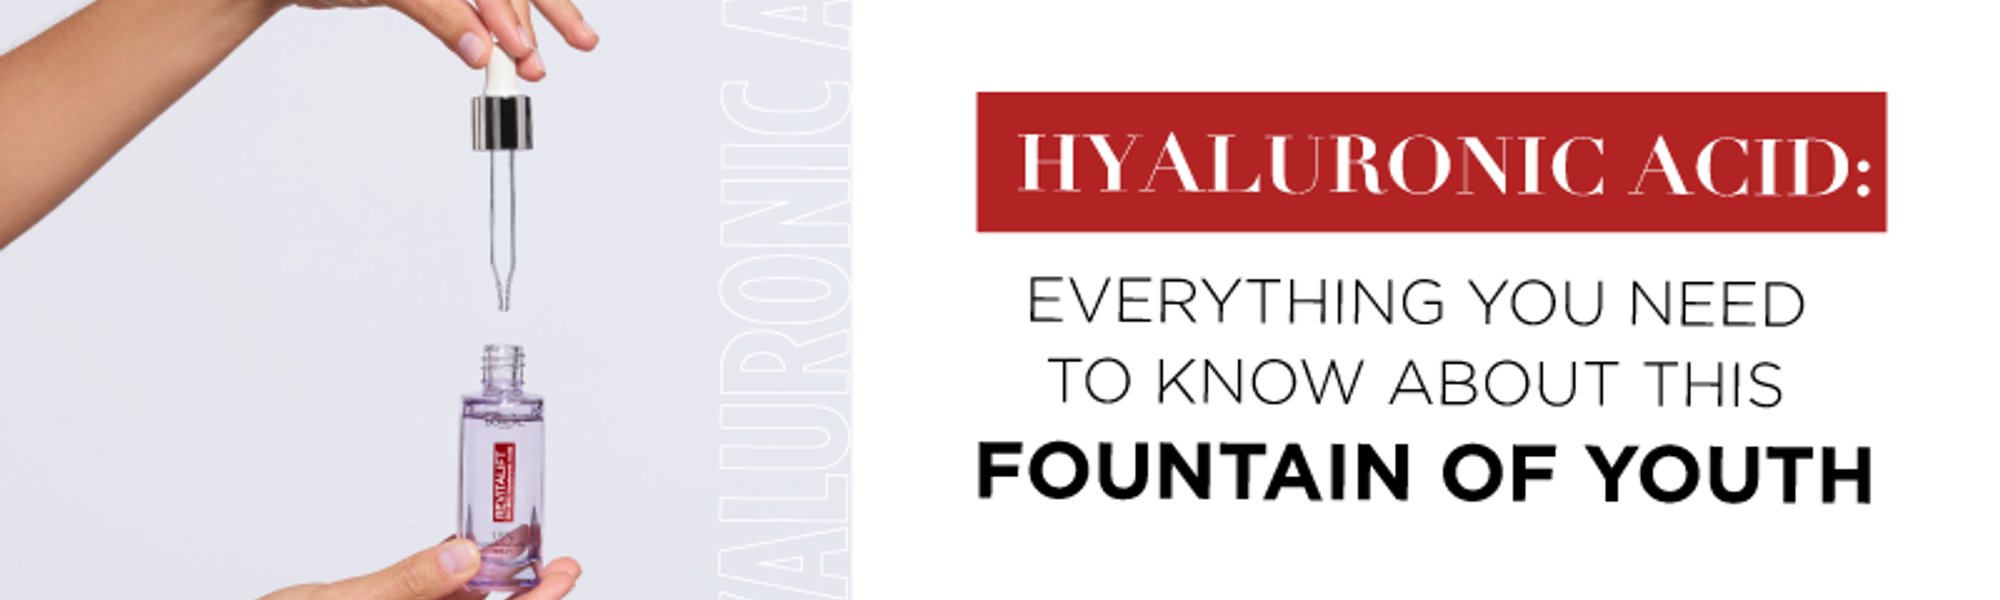 Article banner image for Hyaluronic acid: everything you need to know about this fountain of youth